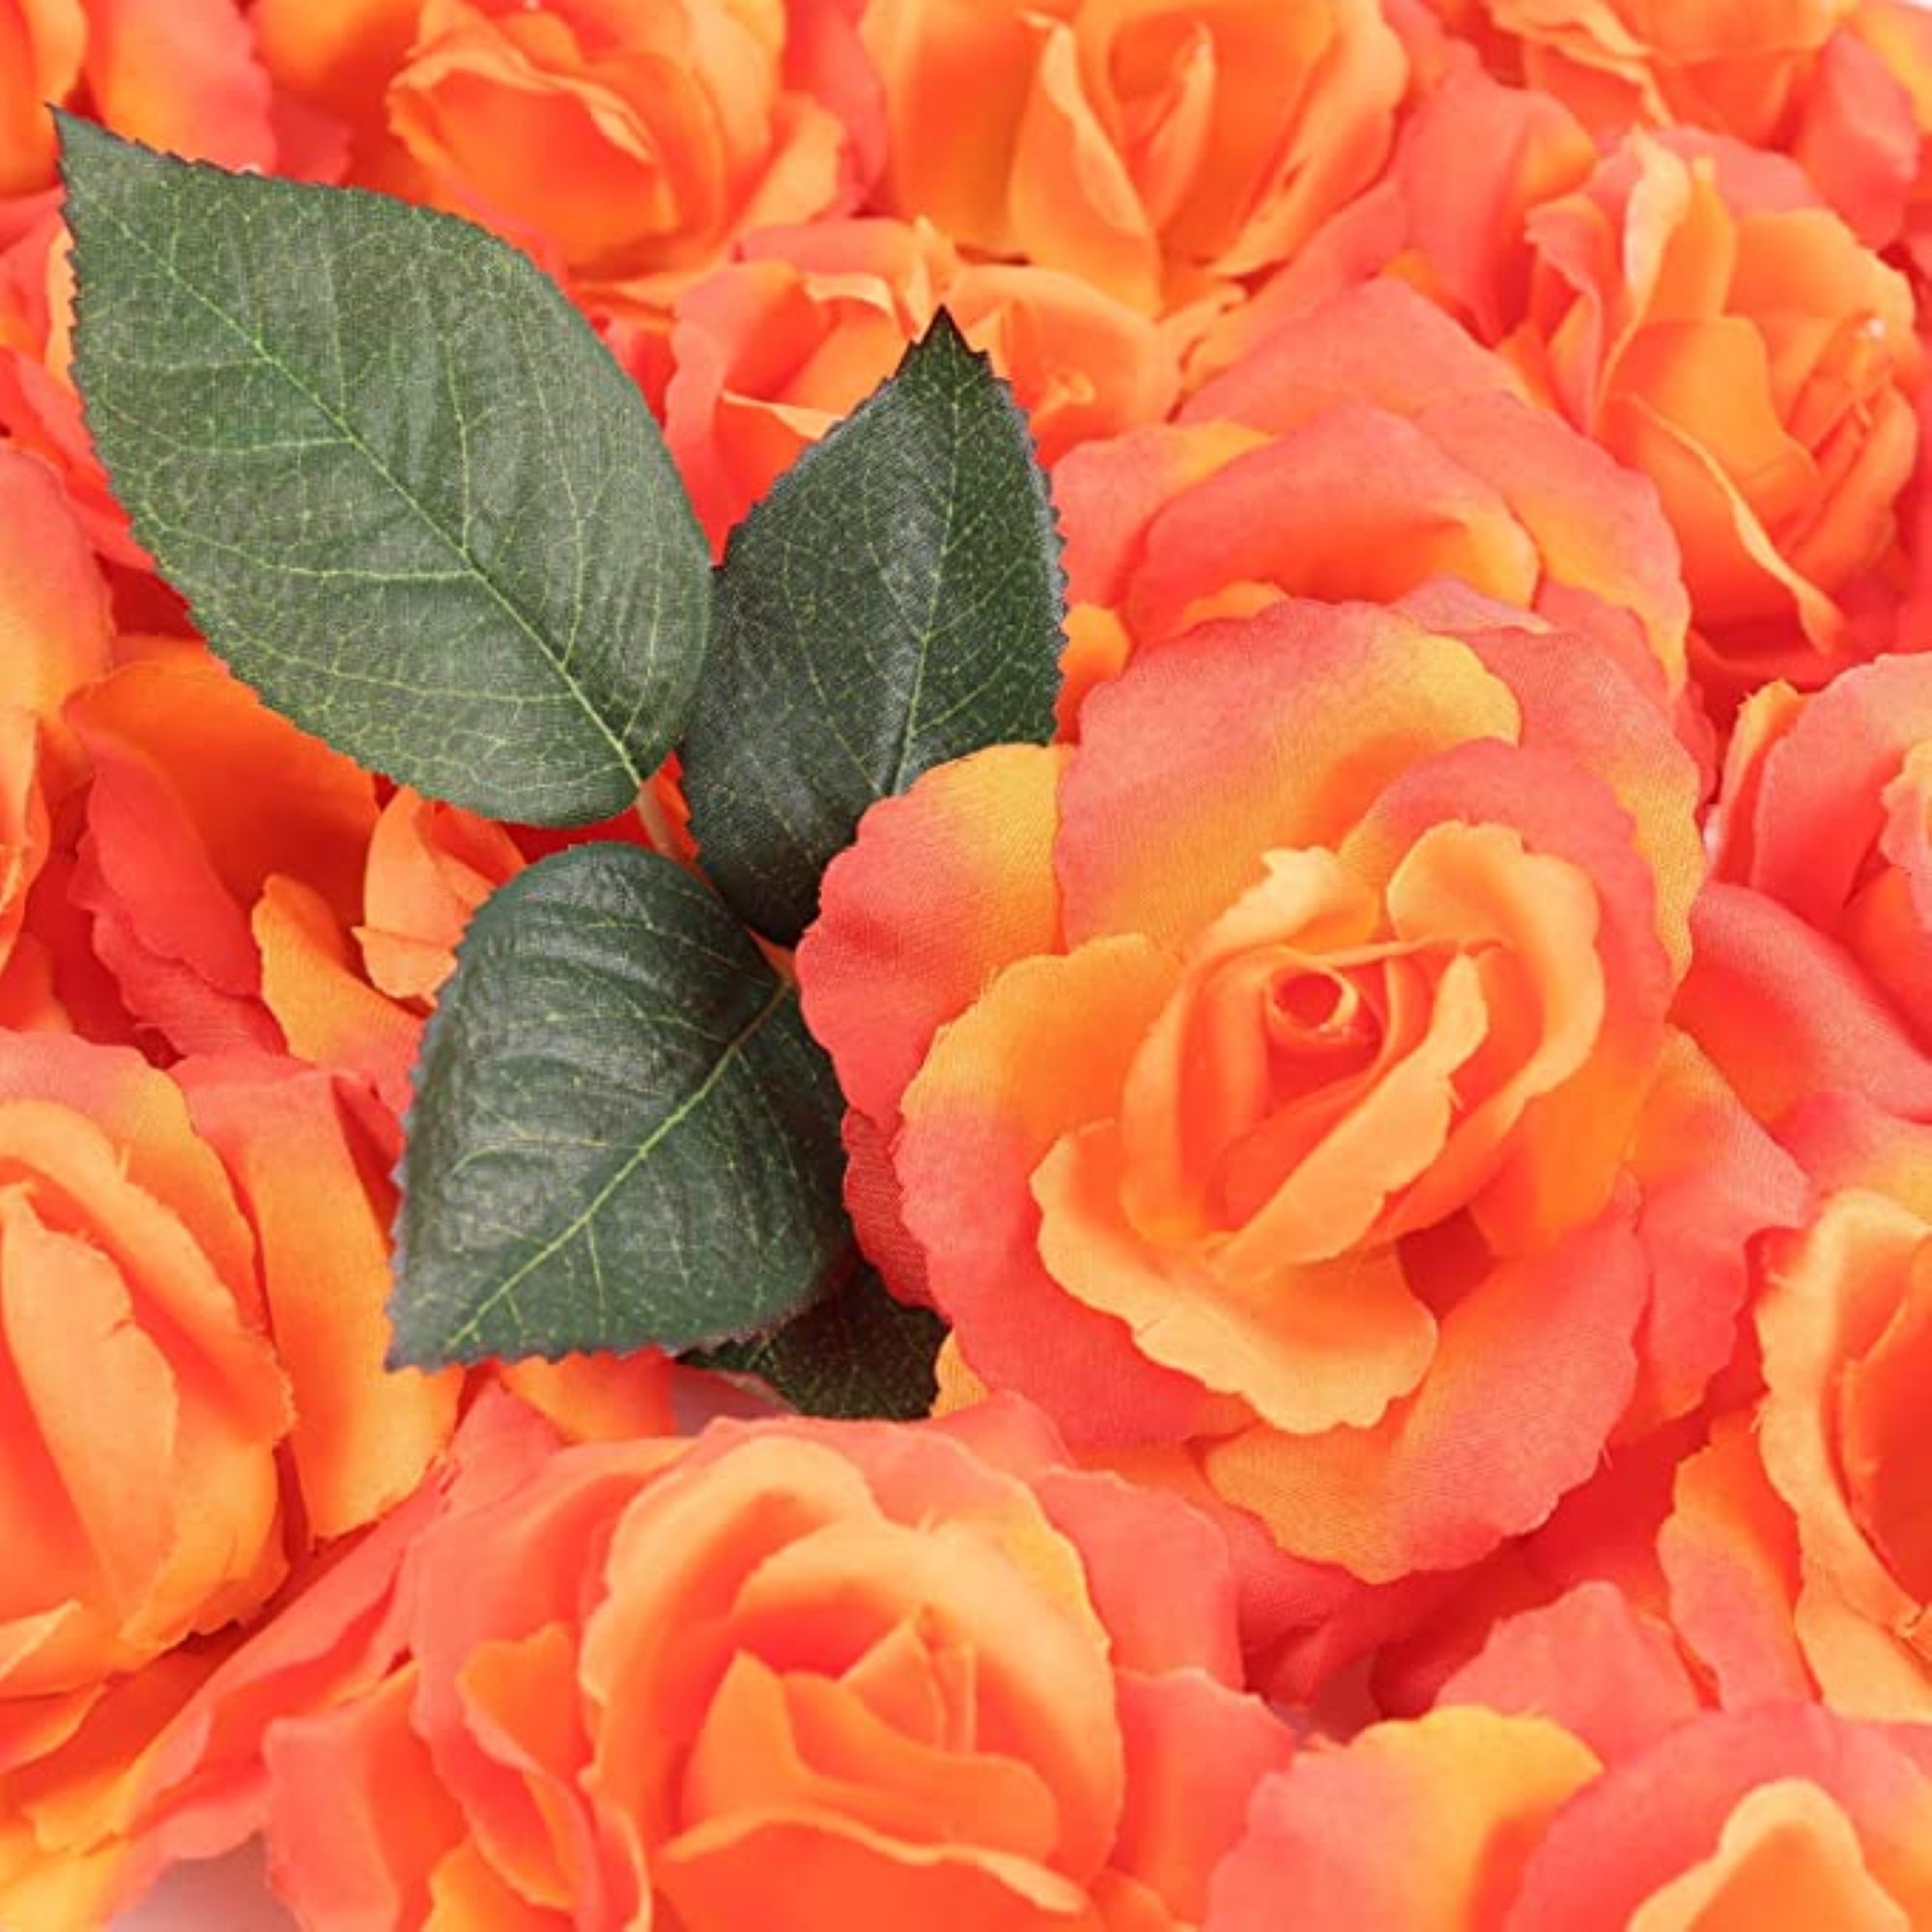 Vibrant and Lifelike: 100pcs Artificial Orange Rose Picks - 8" - Enhance Your Space with Stunning Faux Roses, Ideal for Home Decor, Weddings, and DIY Crafts